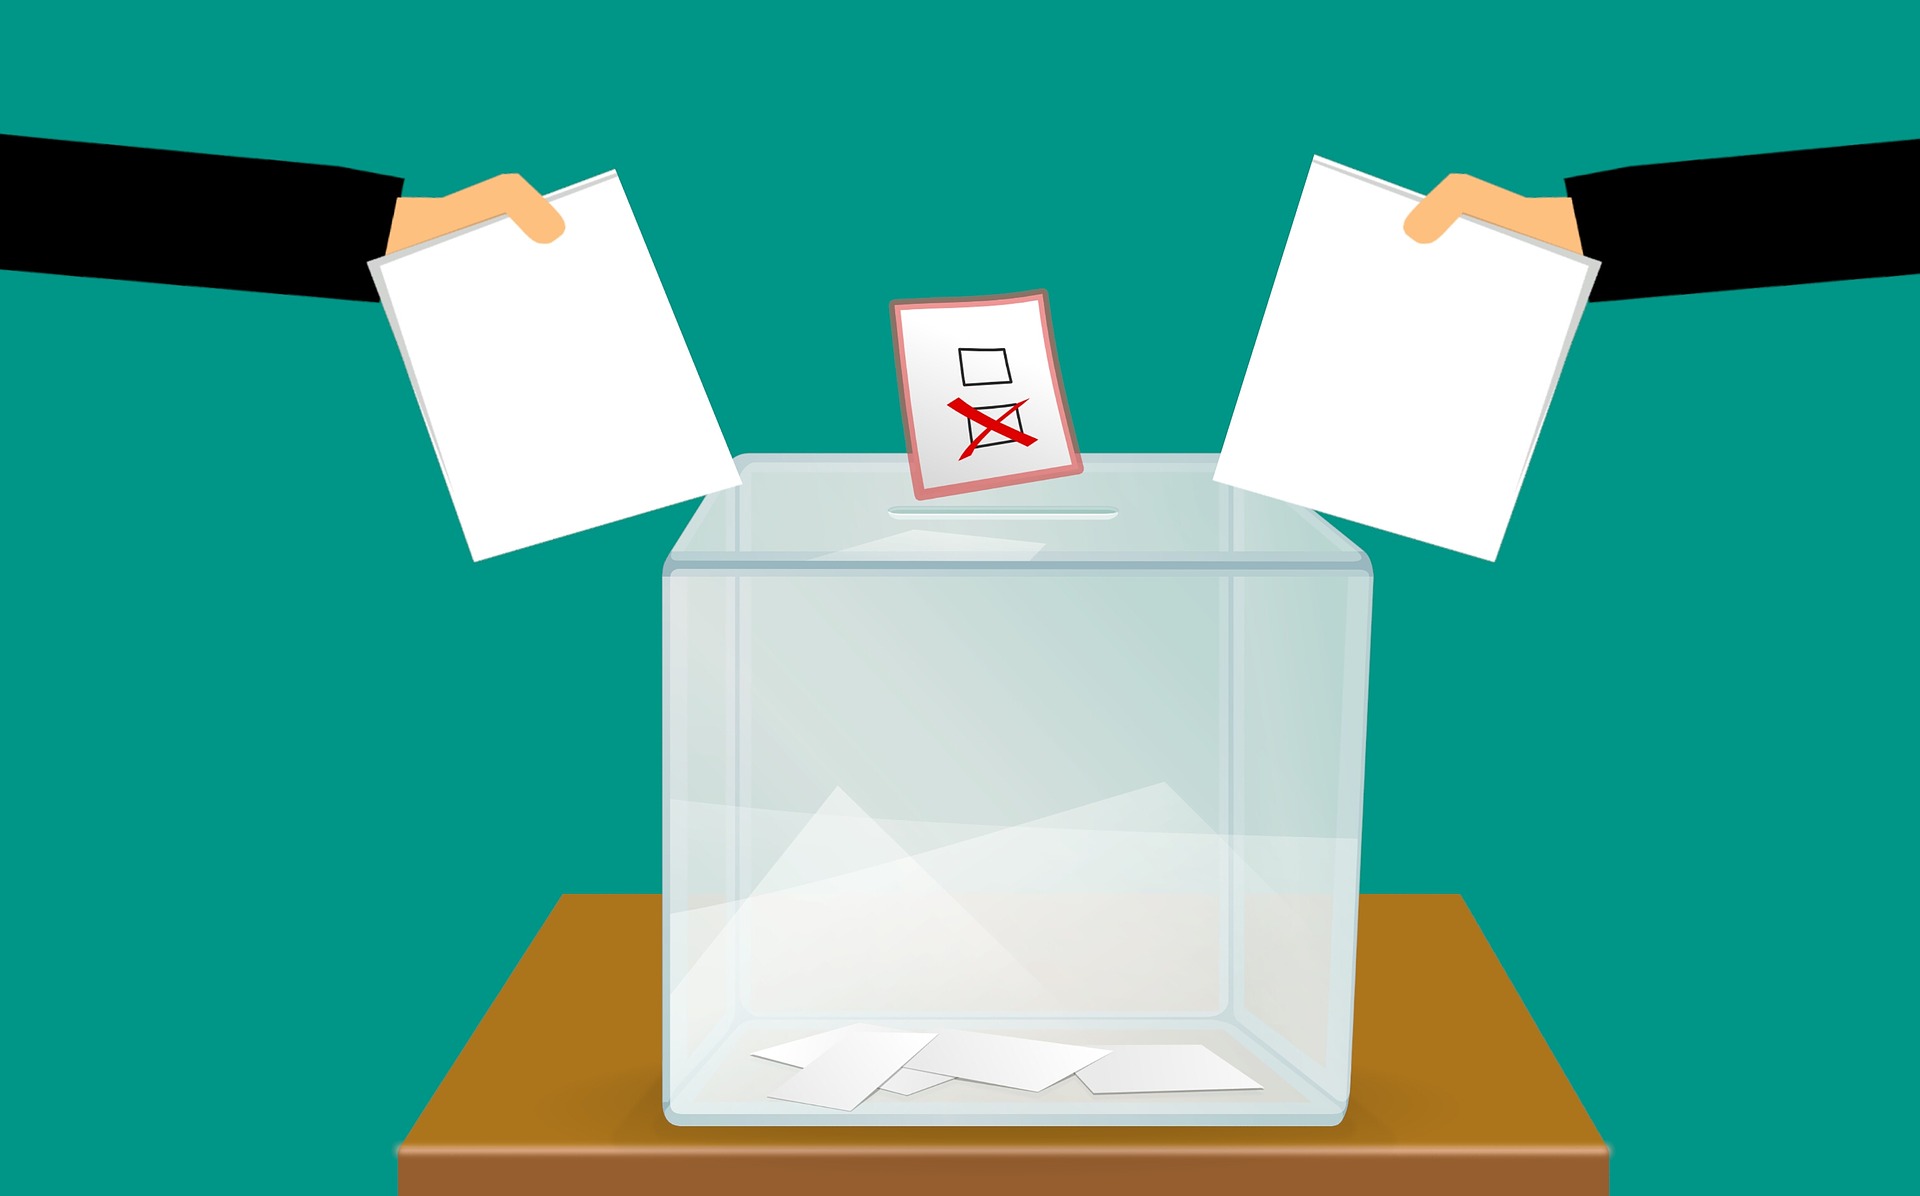 Ballot box, image by mohamed Hassan from Pixabay